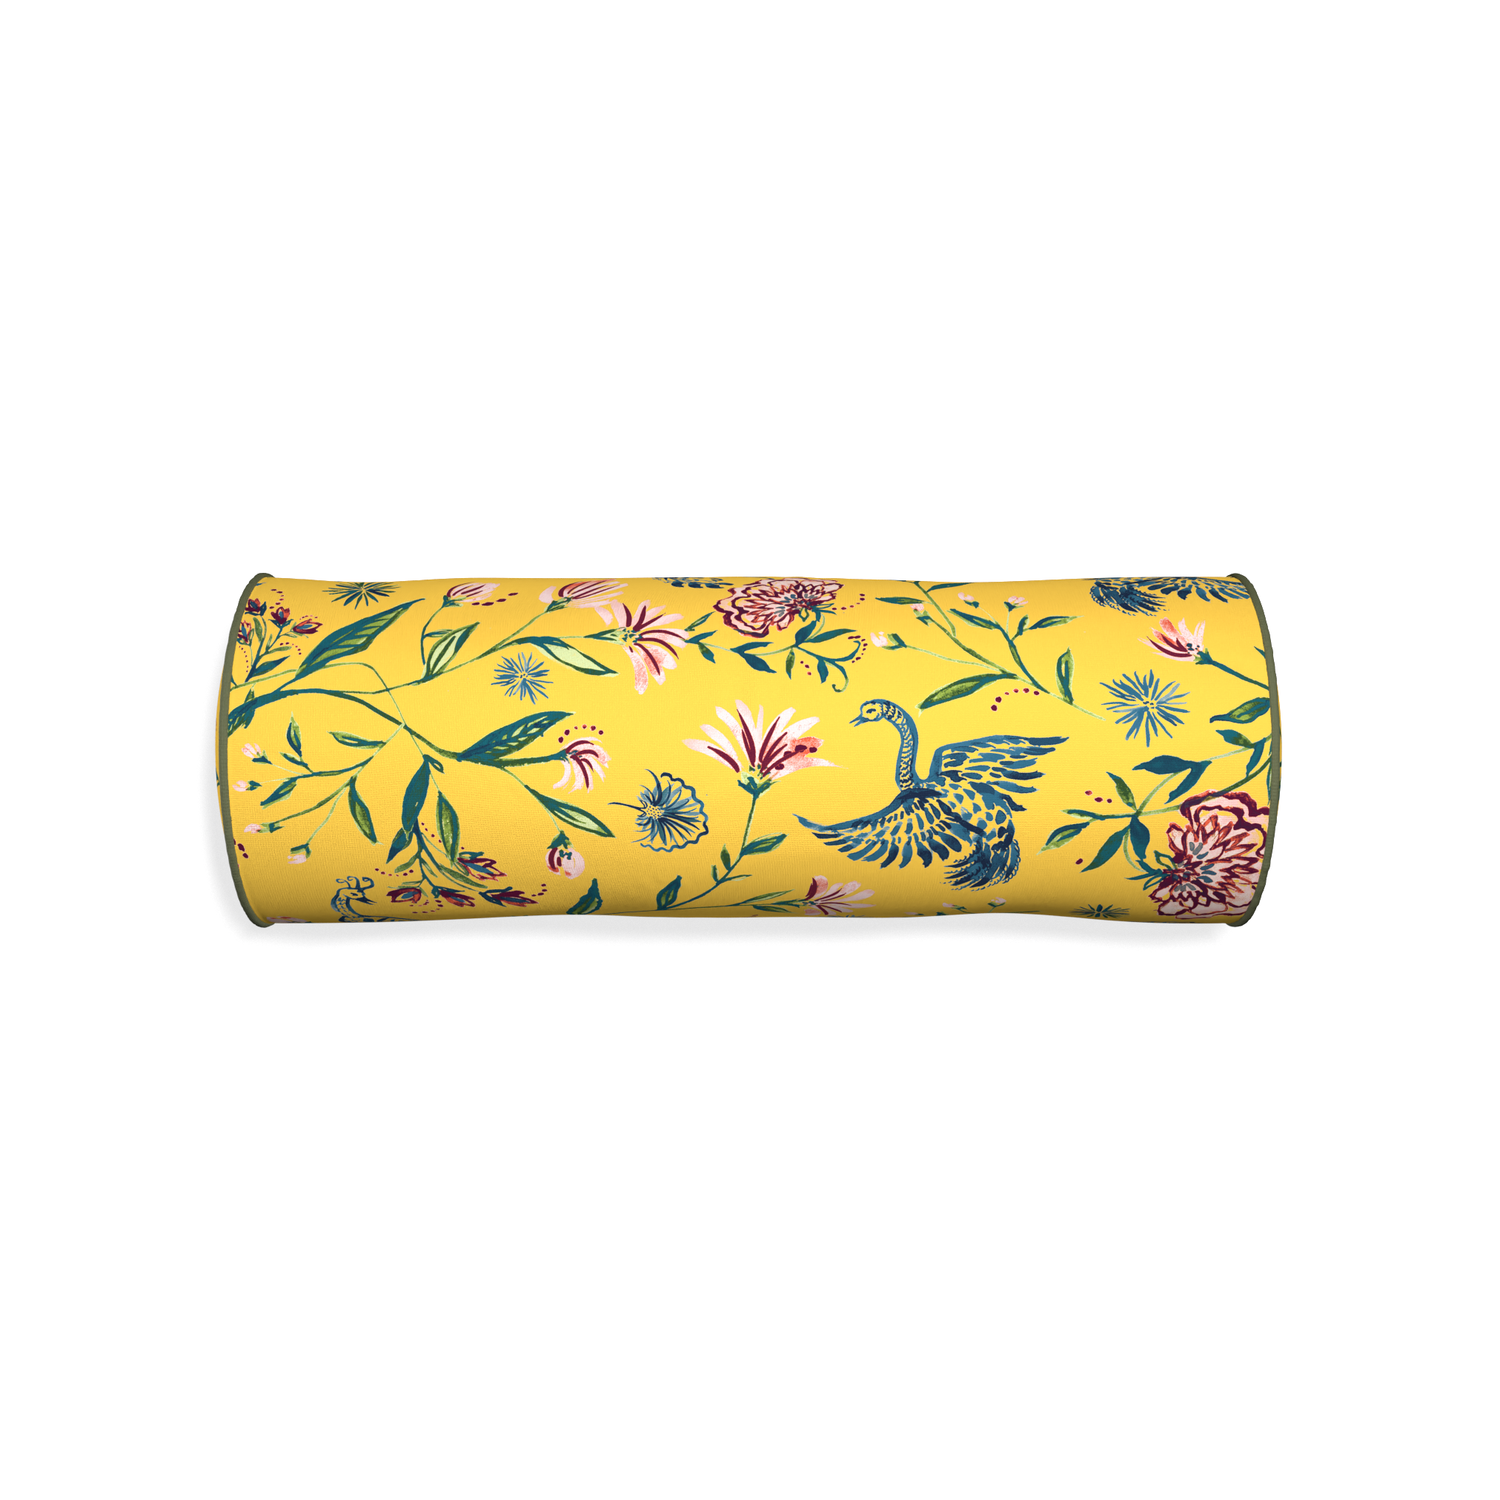 Bolster daphne canary custom yellow chinoiseriepillow with f piping on white background